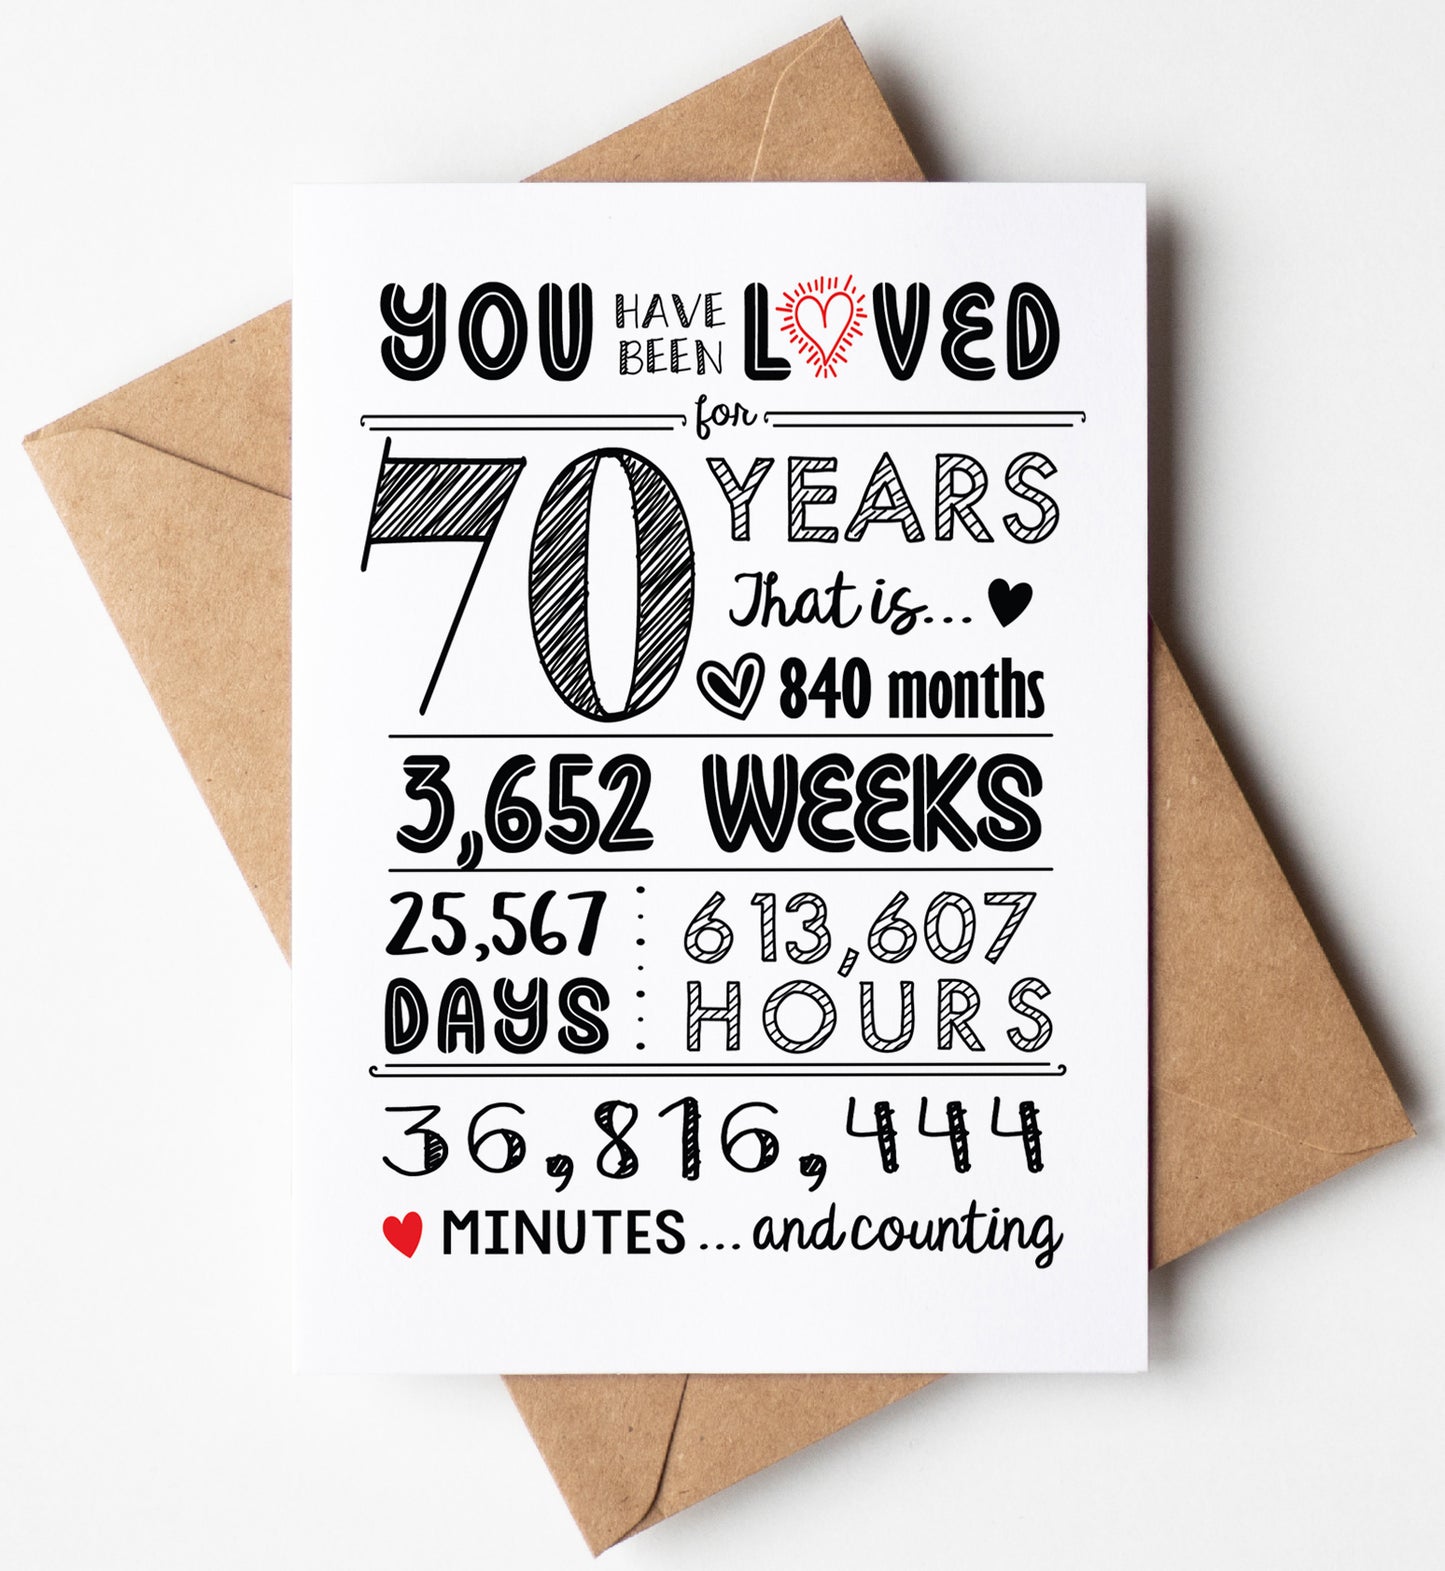 70th Birthday Card (70 Years Loved) with Envelope